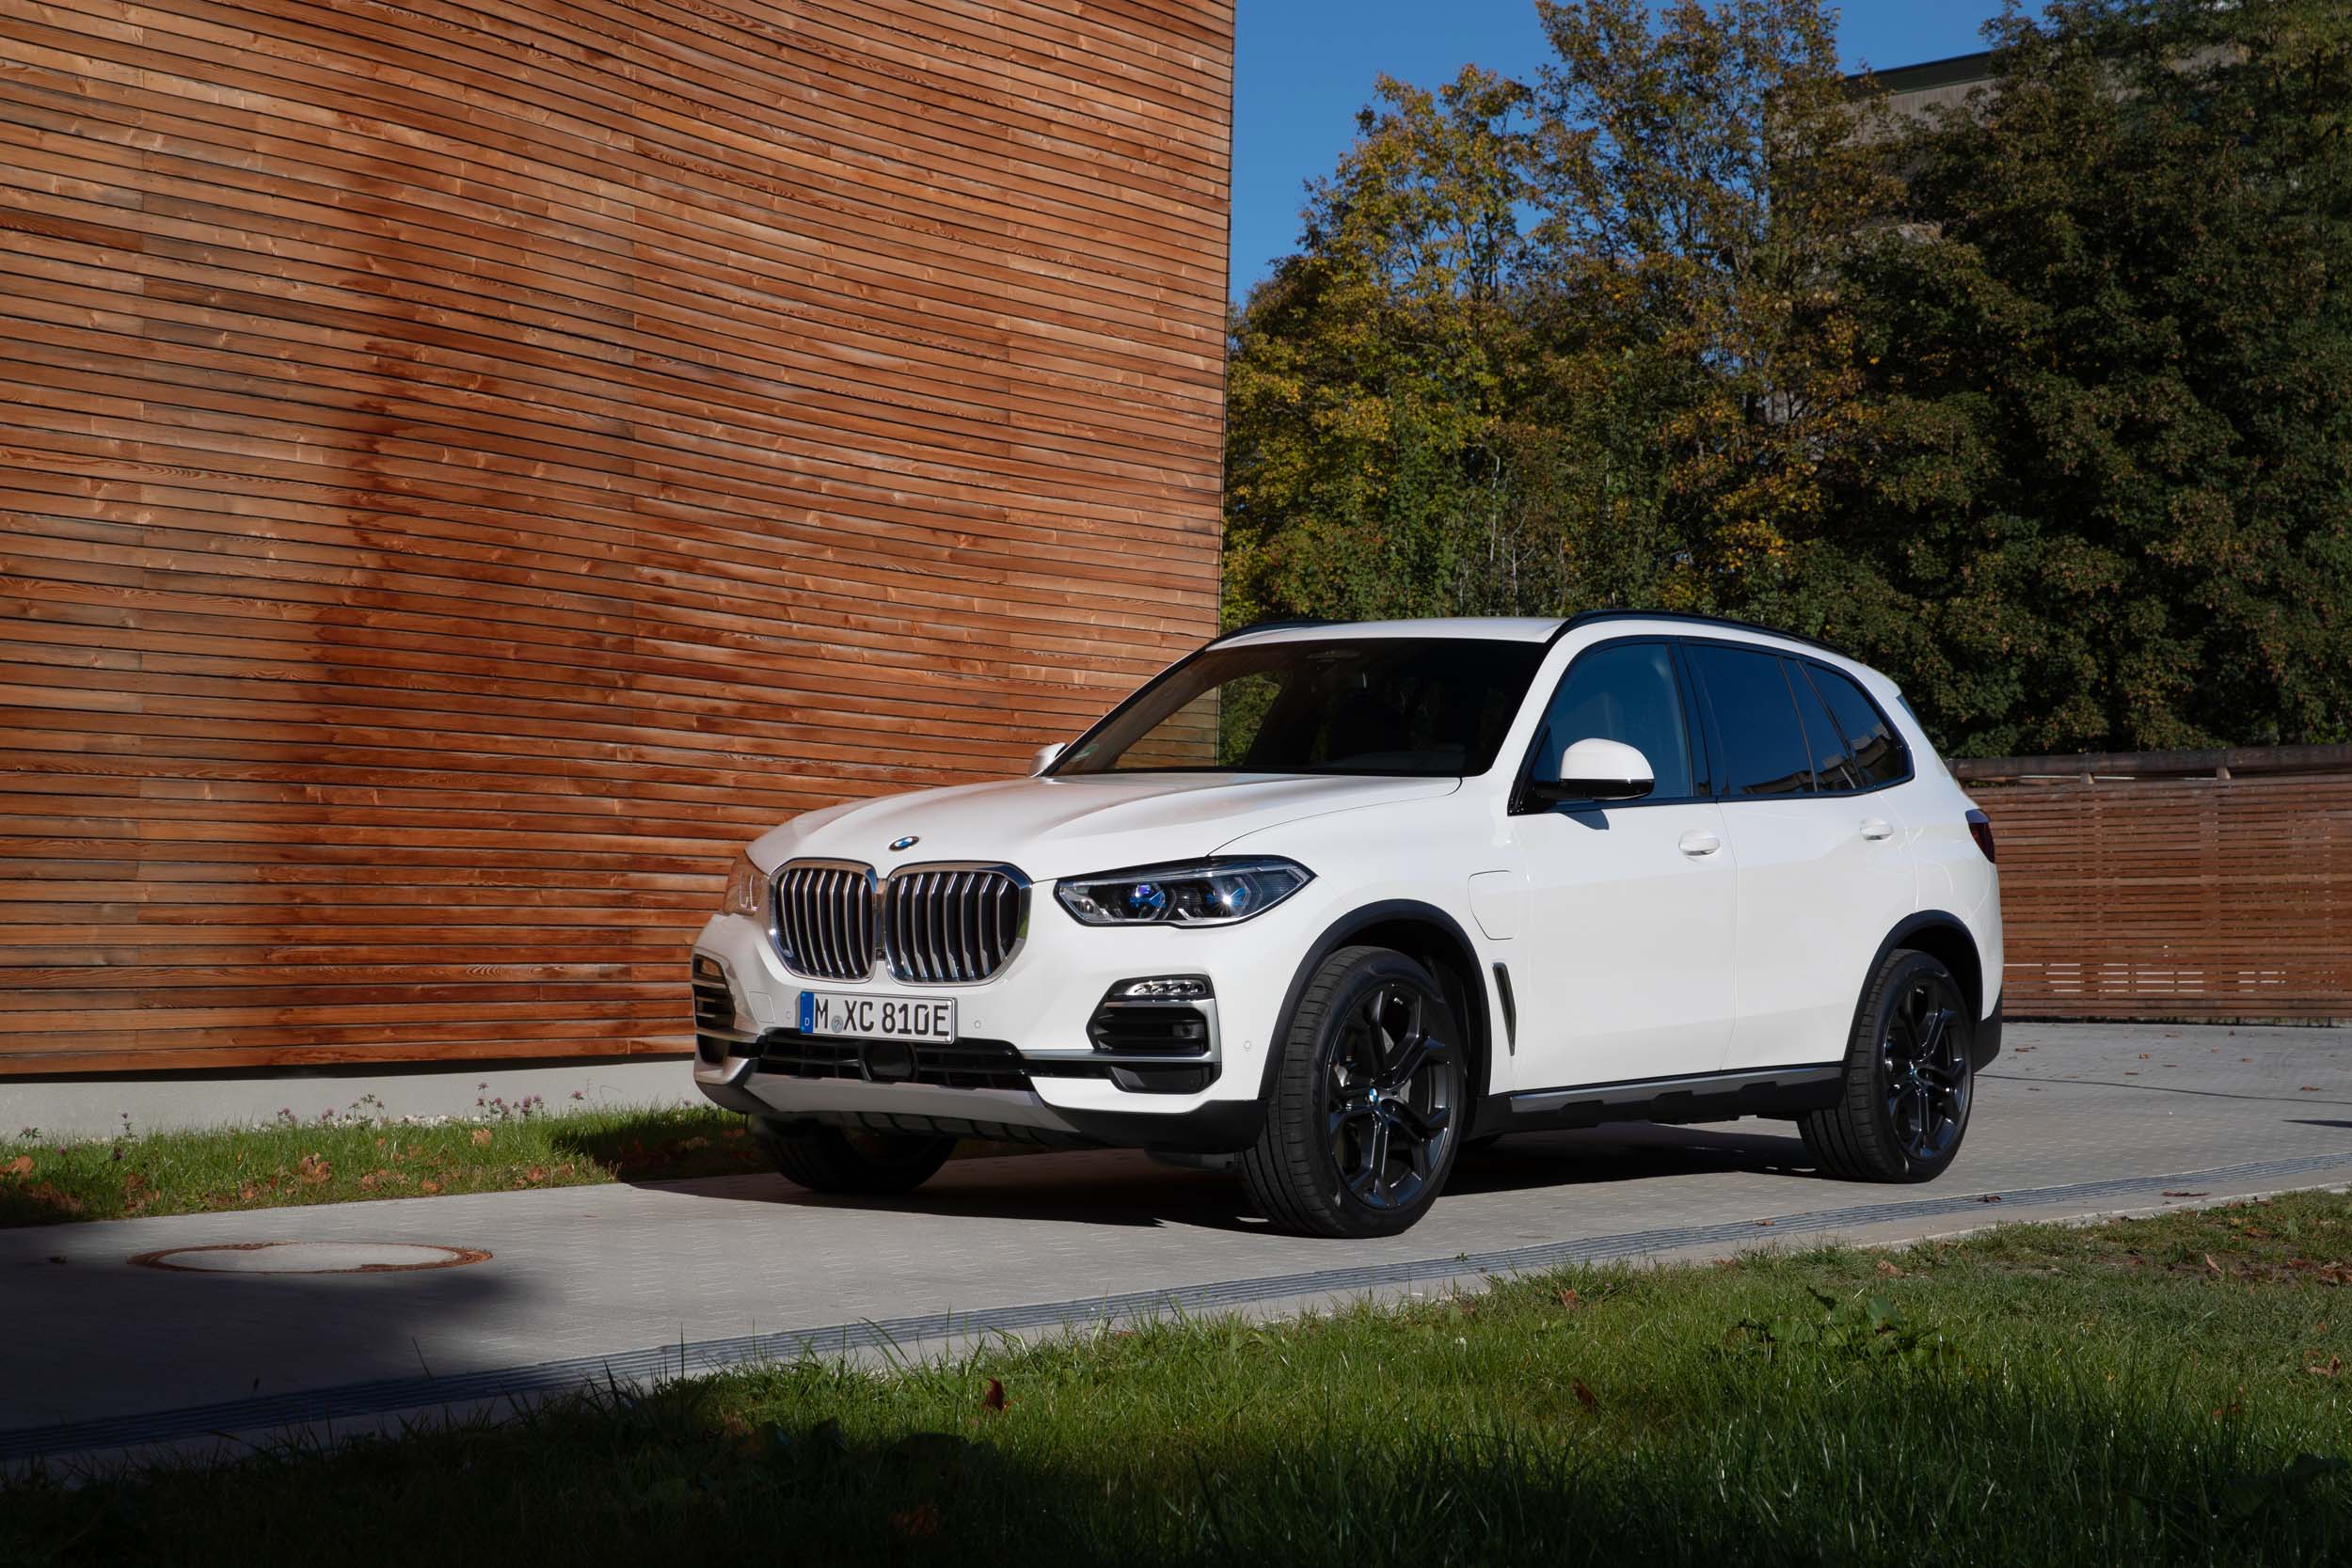 THE 2021 BMW X5 XDRIVE45E PHEV SPORTS ACTIVITY VEHICLE. We Are Motor